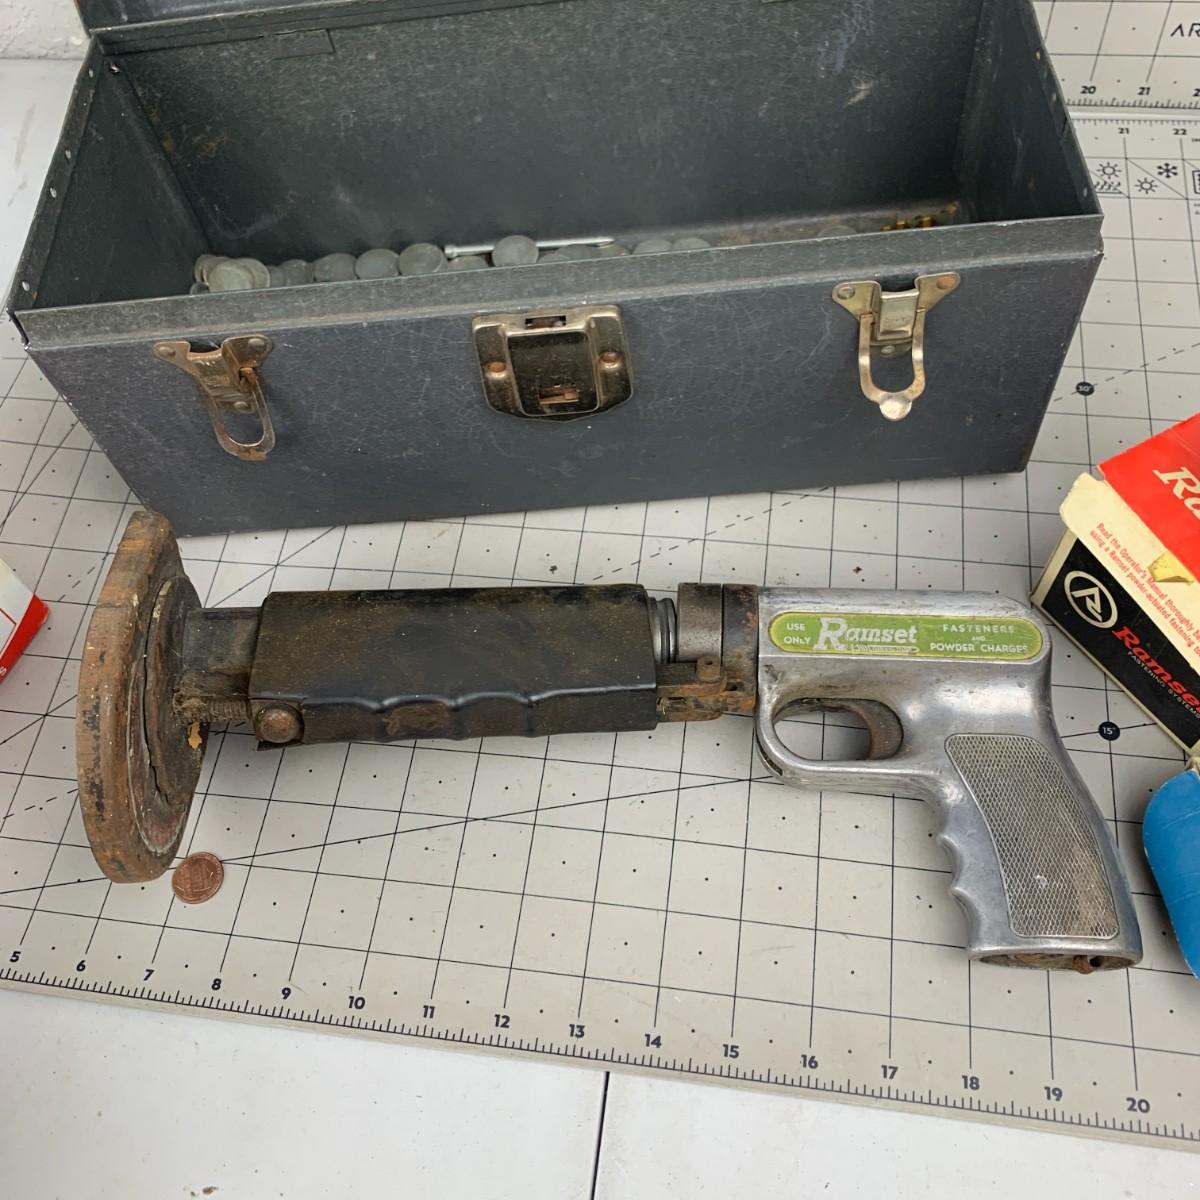 466 Ramset Fasteners and Powder Charger Gun, Tool Box and Misc.